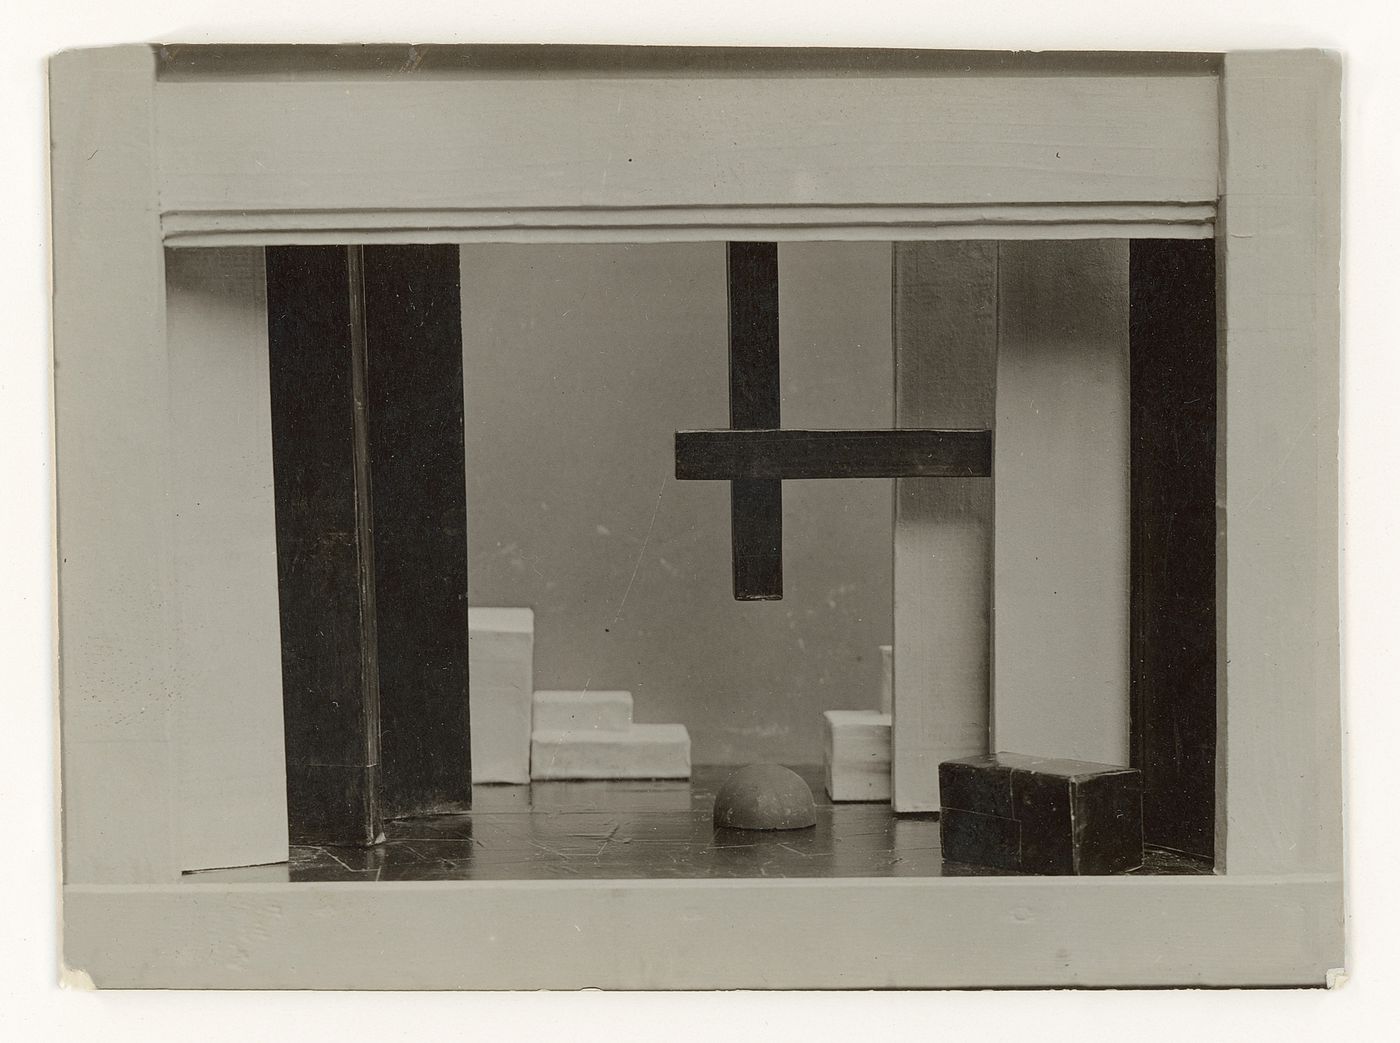 Model for the Standard Stage Merz by Kurt Schwitters